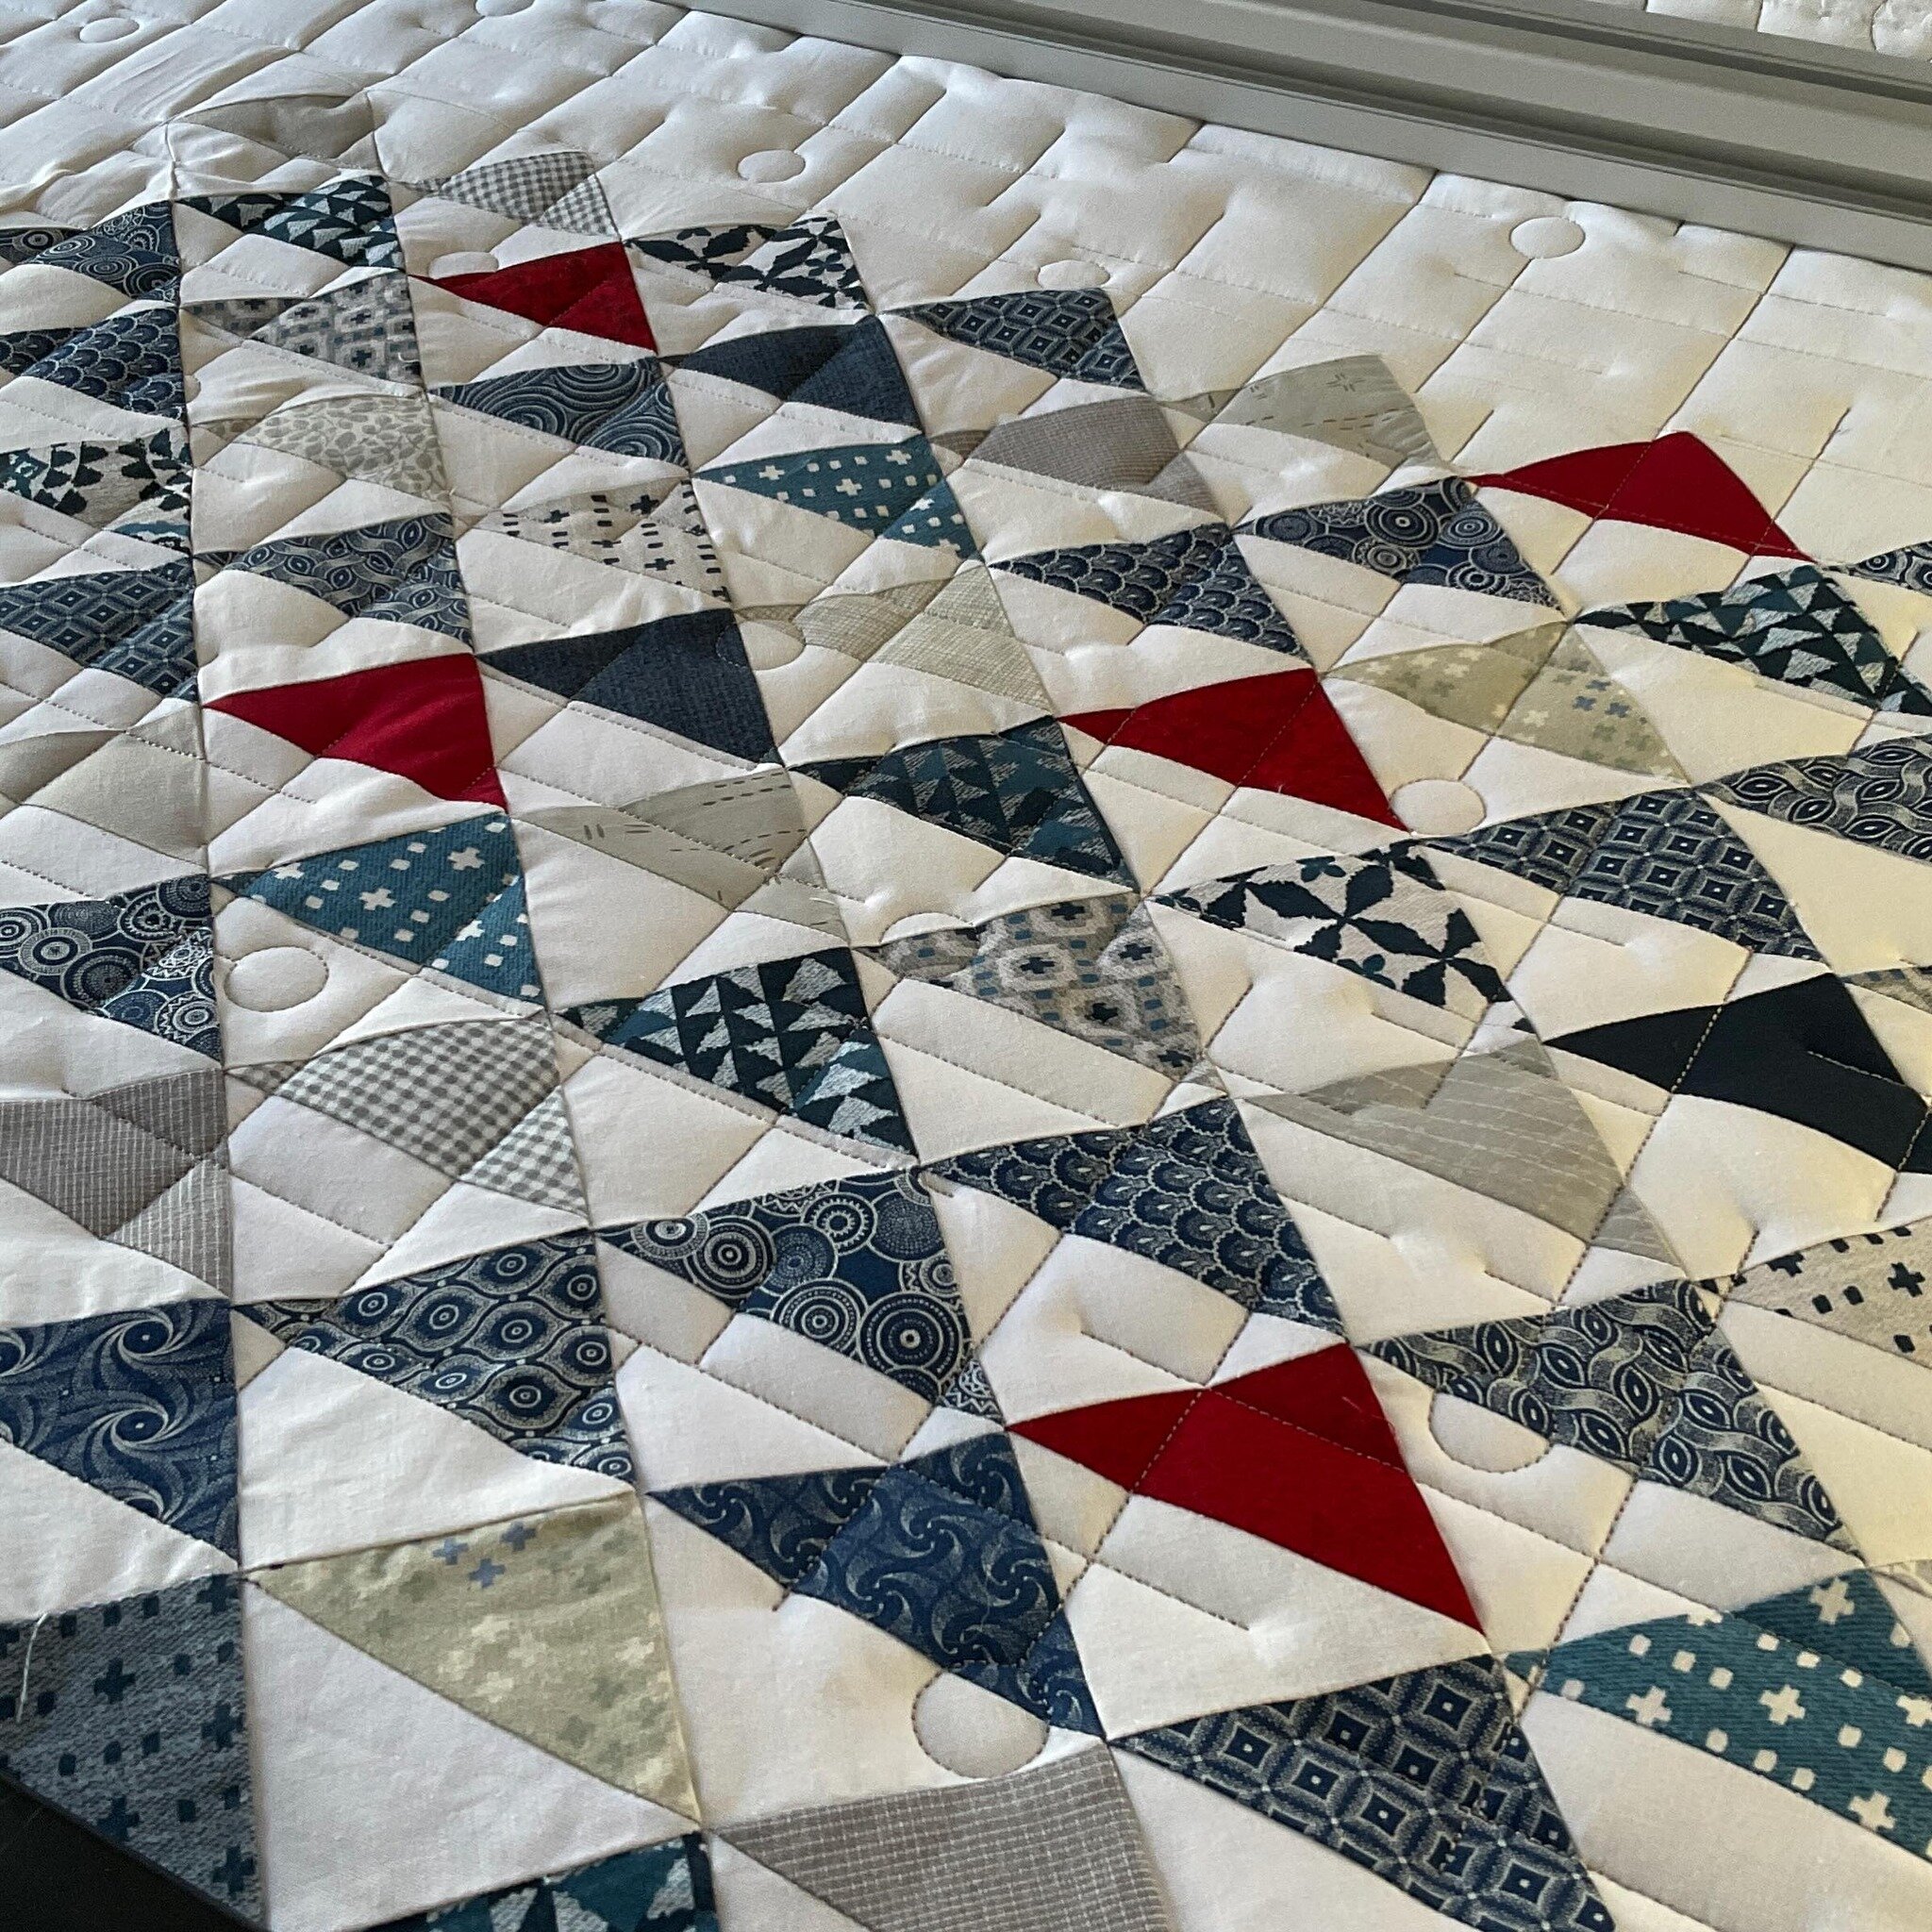 Texture! Retro Lines, double batting, and #glidethread in Flint create wonderful texture on this gorgeous quilt by @nrfoote 

#longarmquilting #longarmquilter